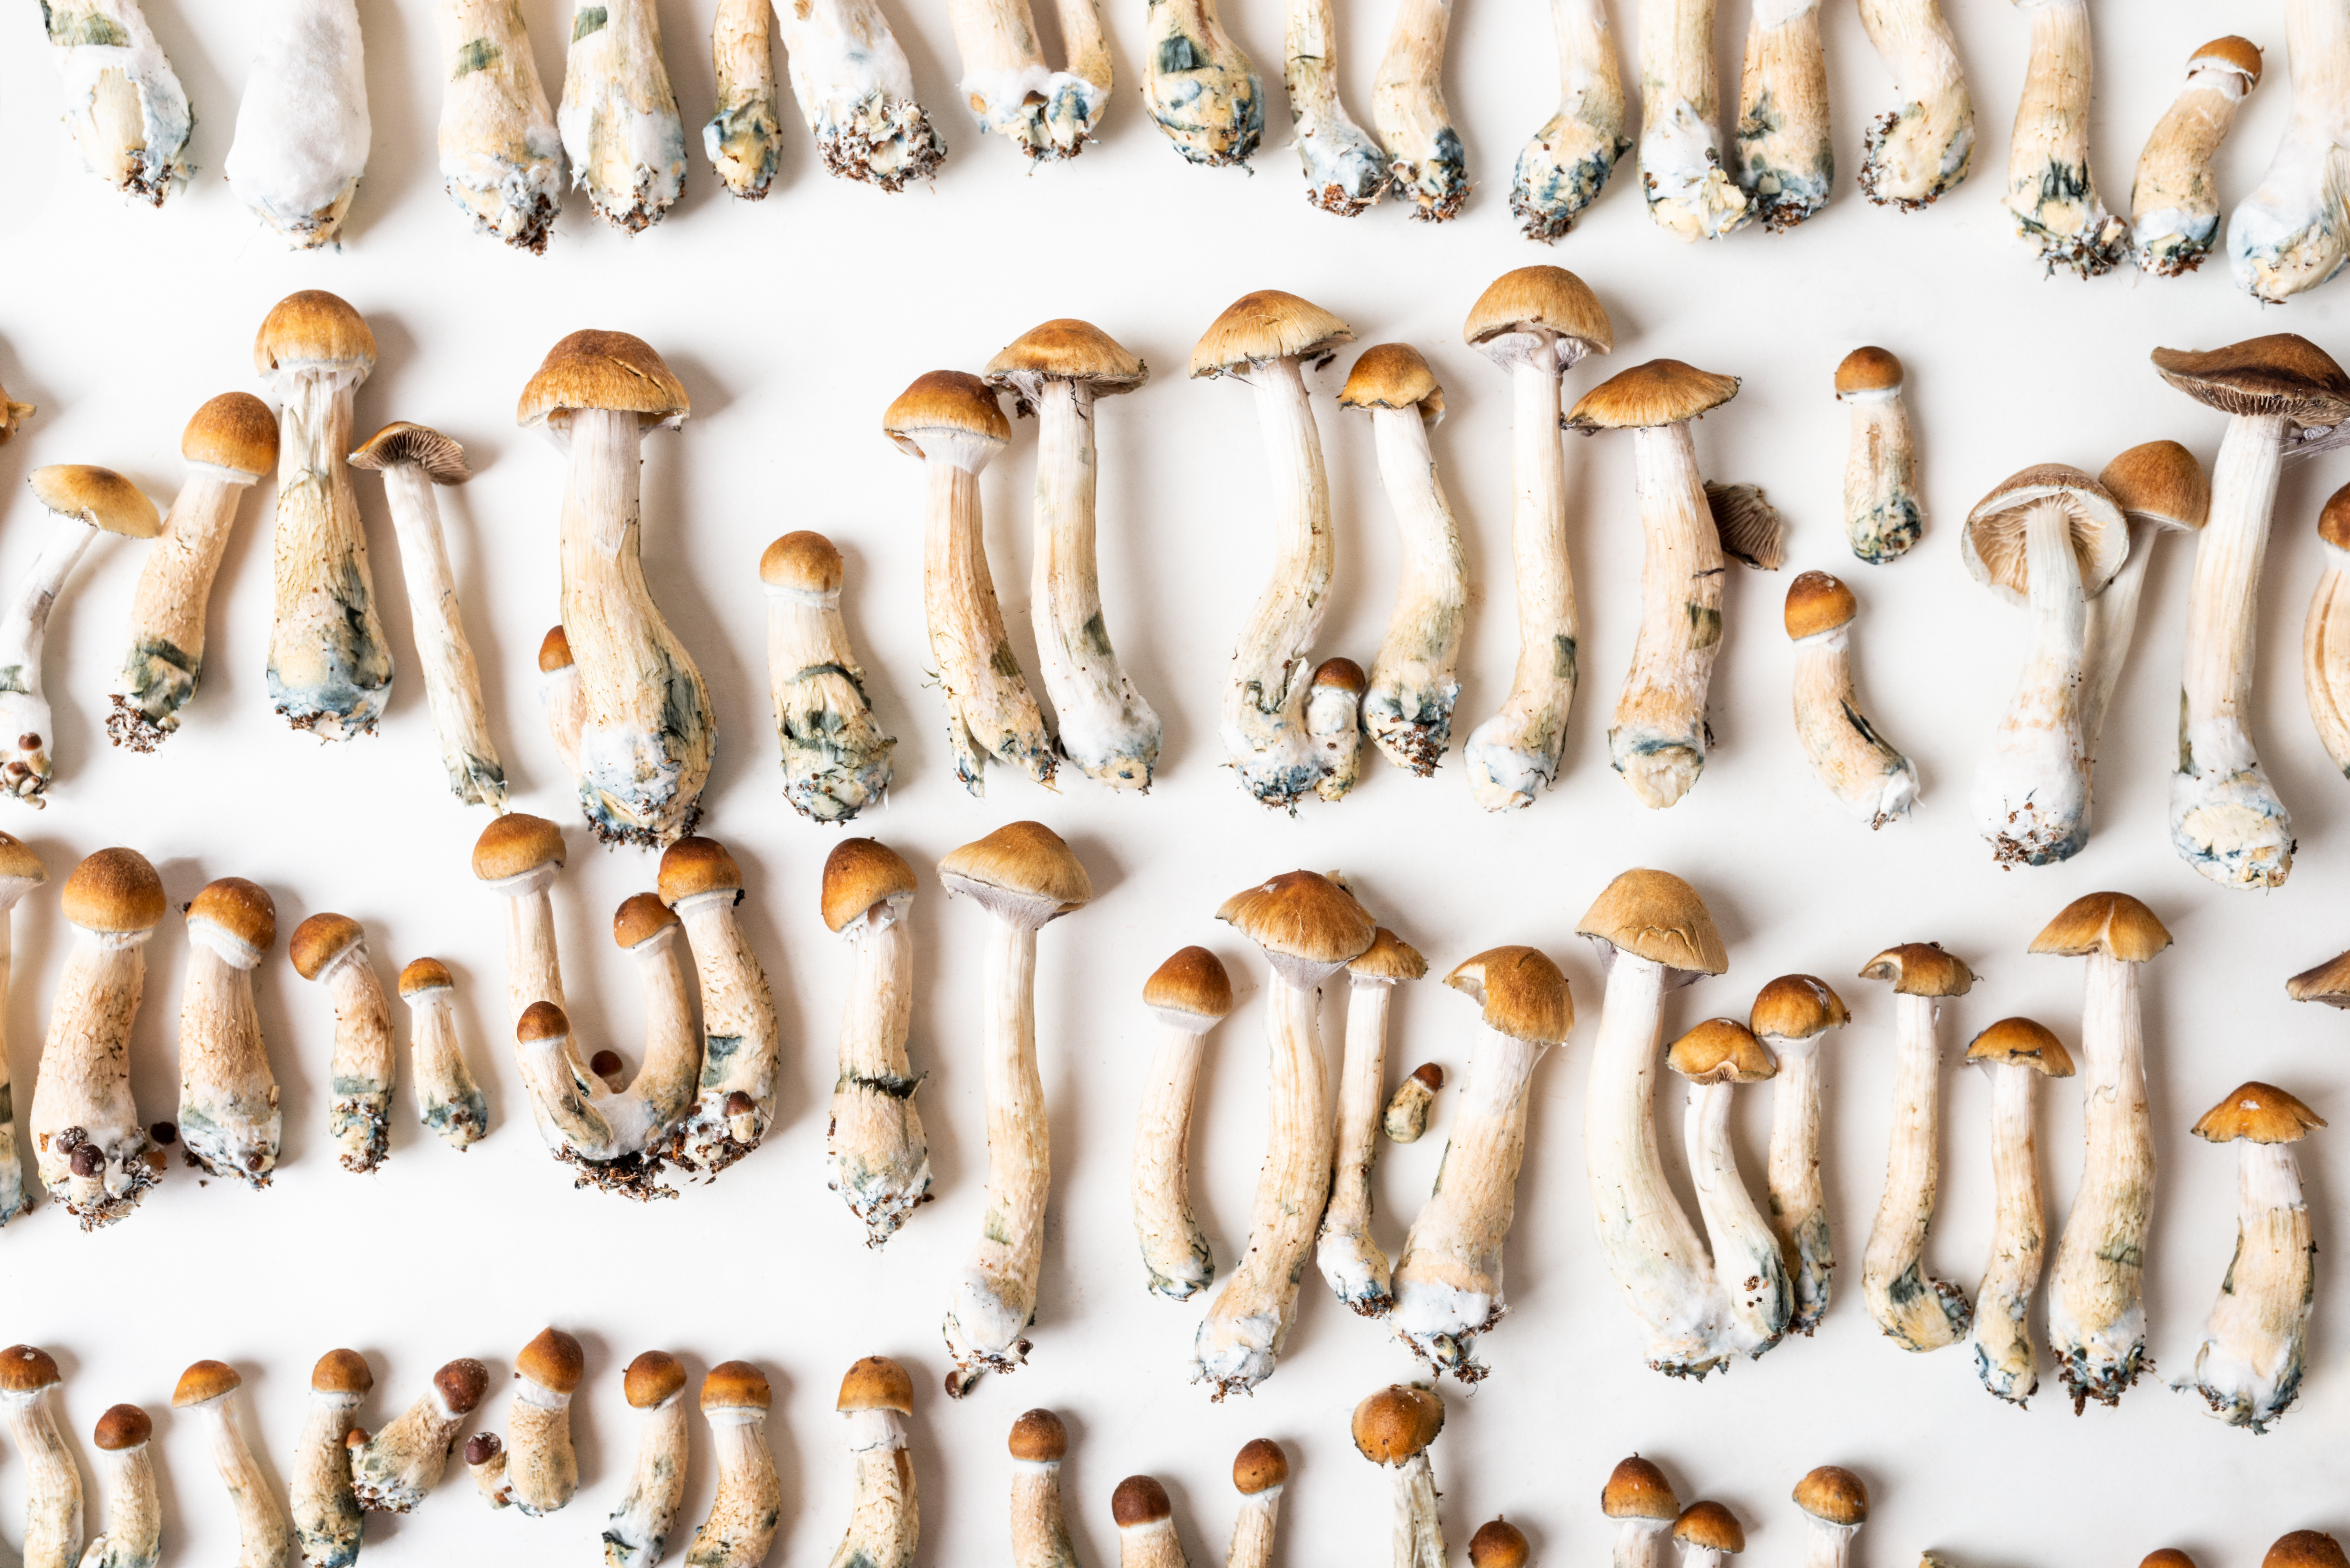 Row after row of tiny psychedelic mushrooms on a white background.